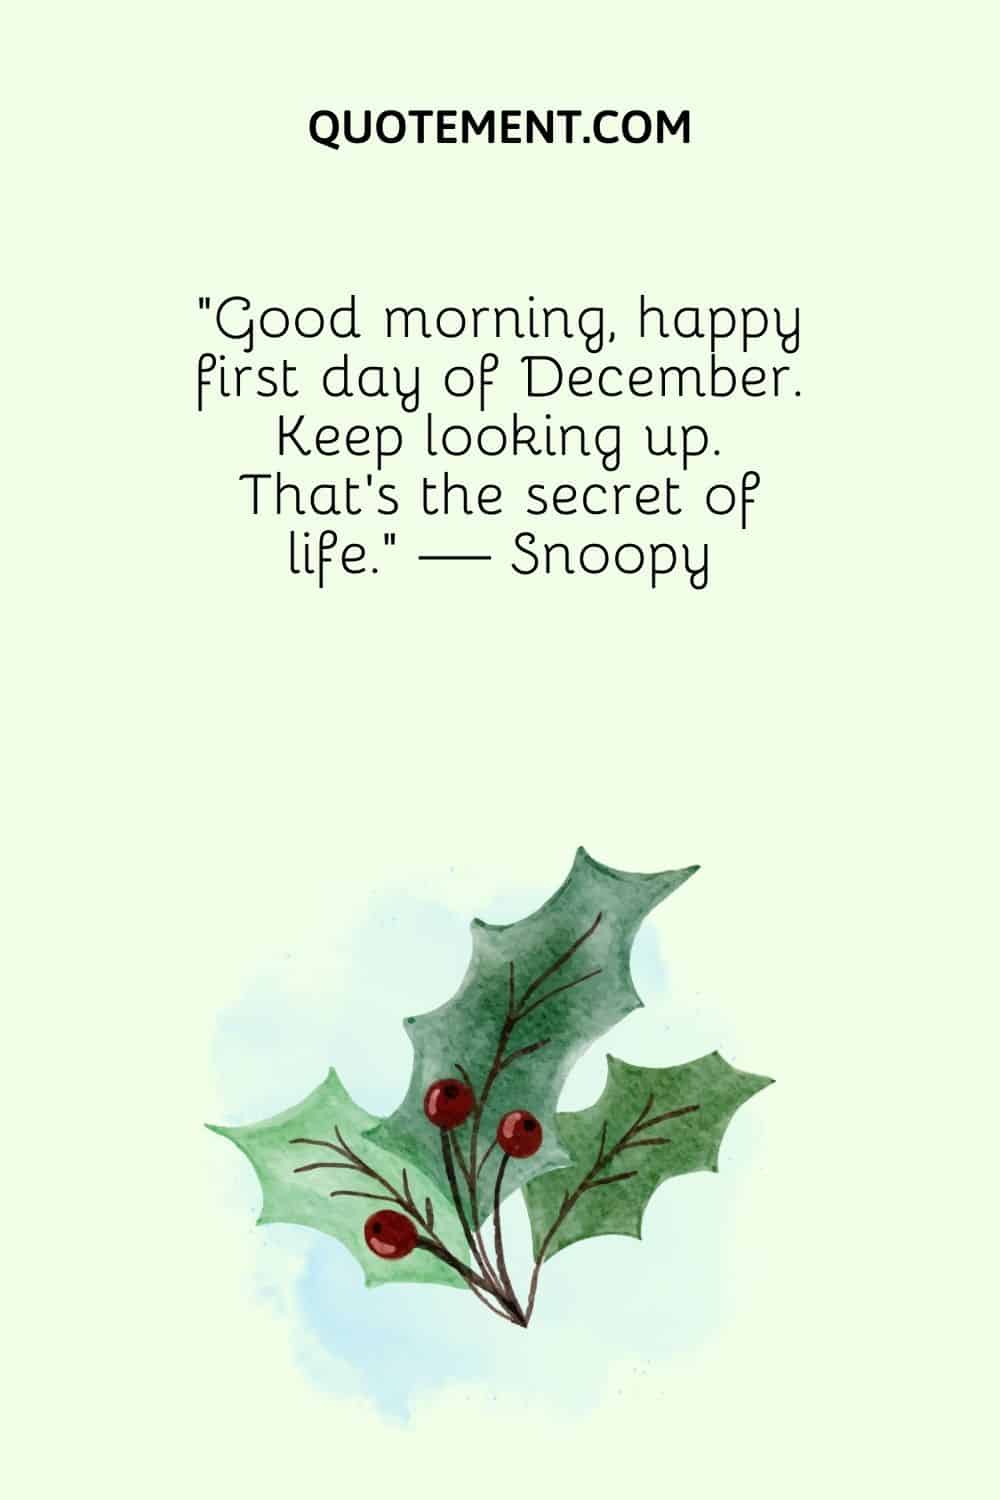 “Good morning, happy first day of December. Keep looking up. That’s the secret of life.” — Snoopy